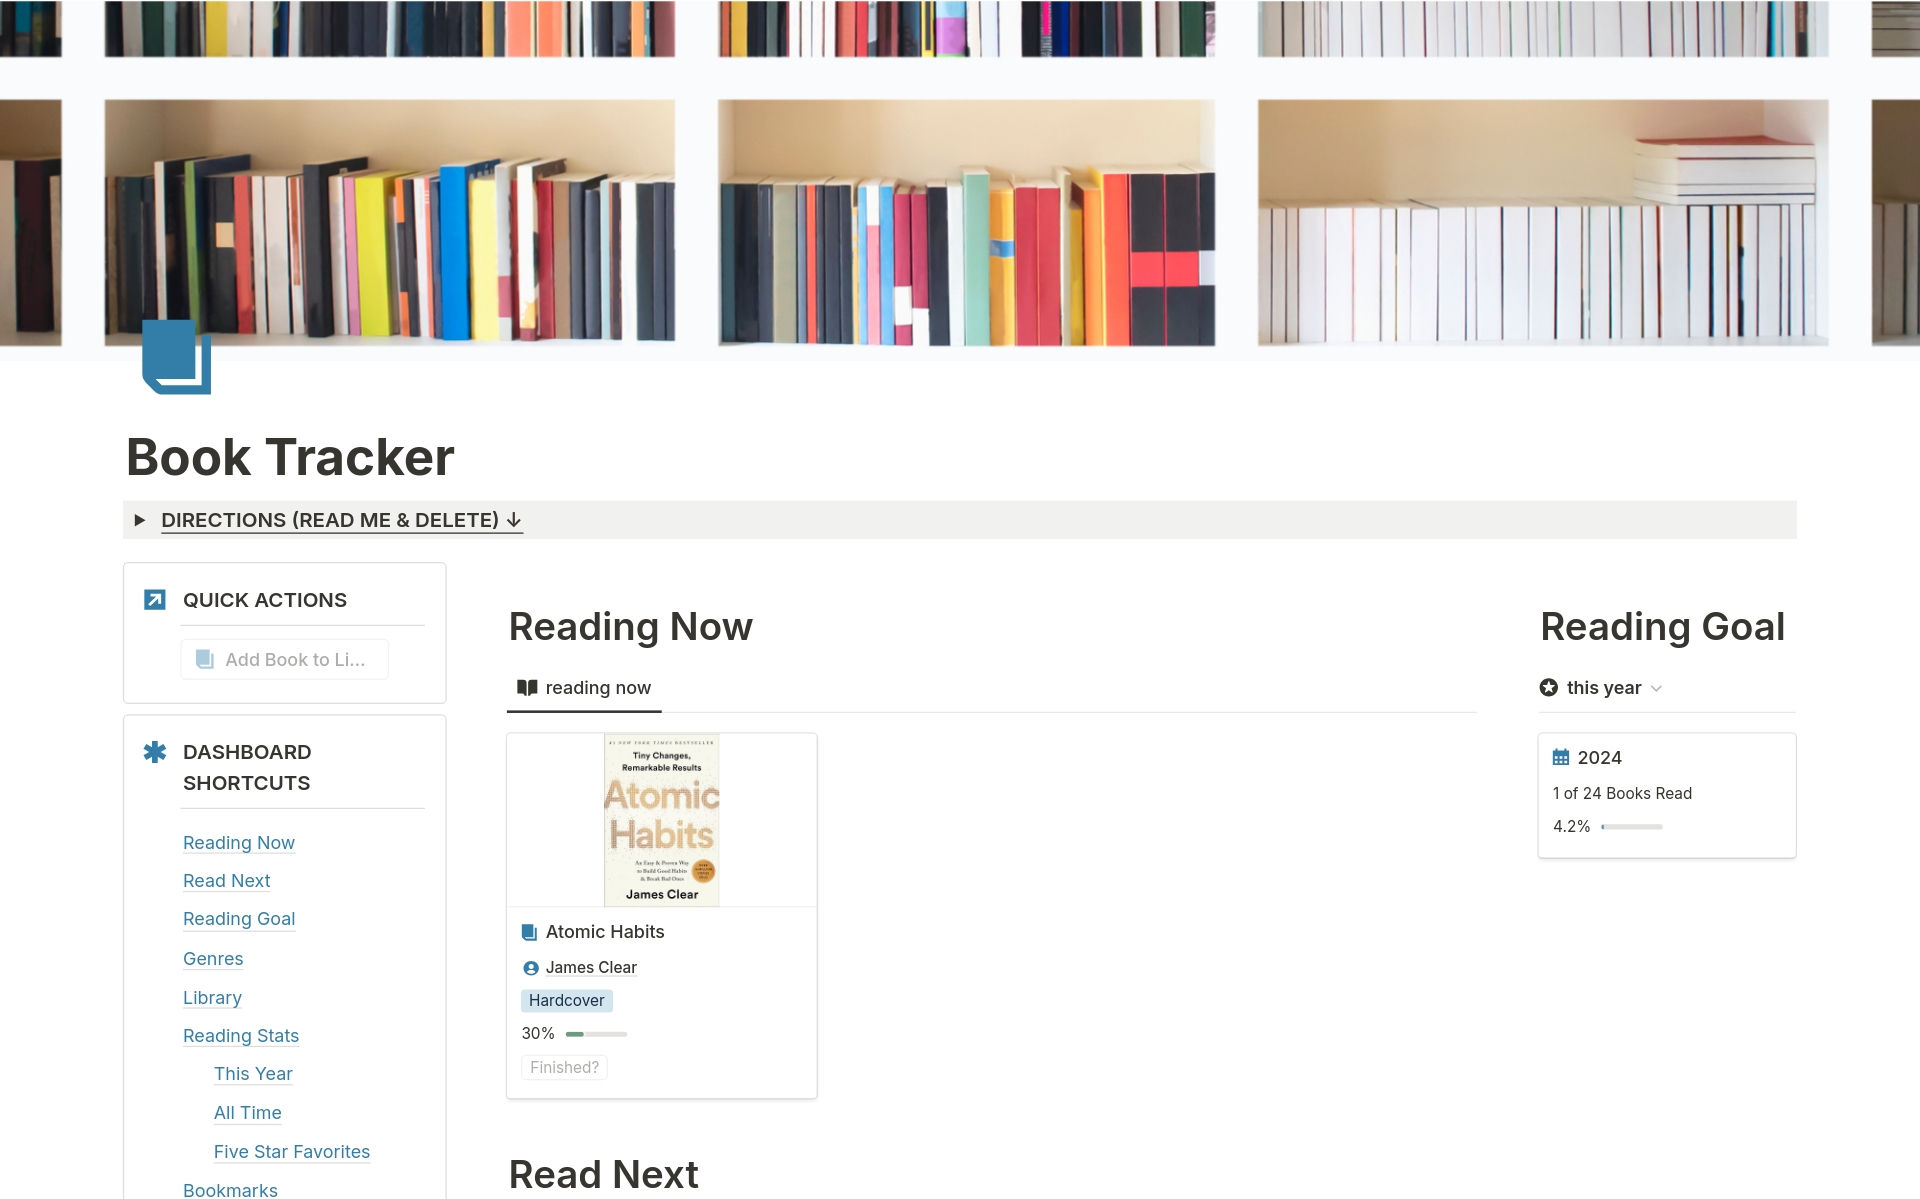 This template helps readers create a digital library of books, organize books by status, author, or genre, set reading goals and track reading progress, rate and review books, and create bookmarks, all in one place. 